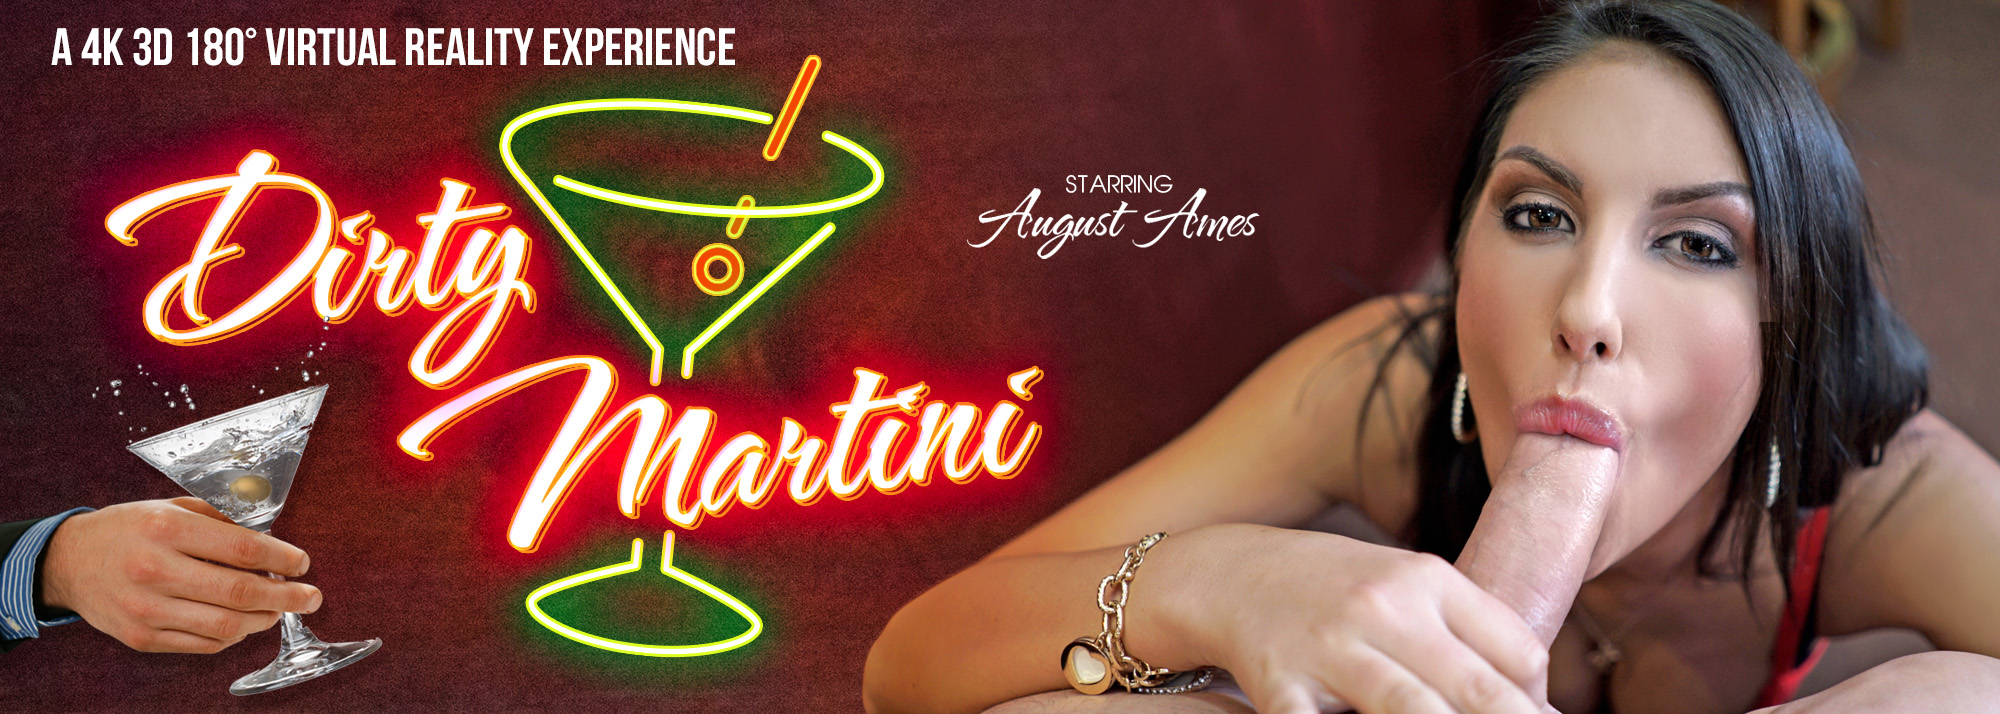 Dirty Martini - VR Porn Video, Starring: August Ames